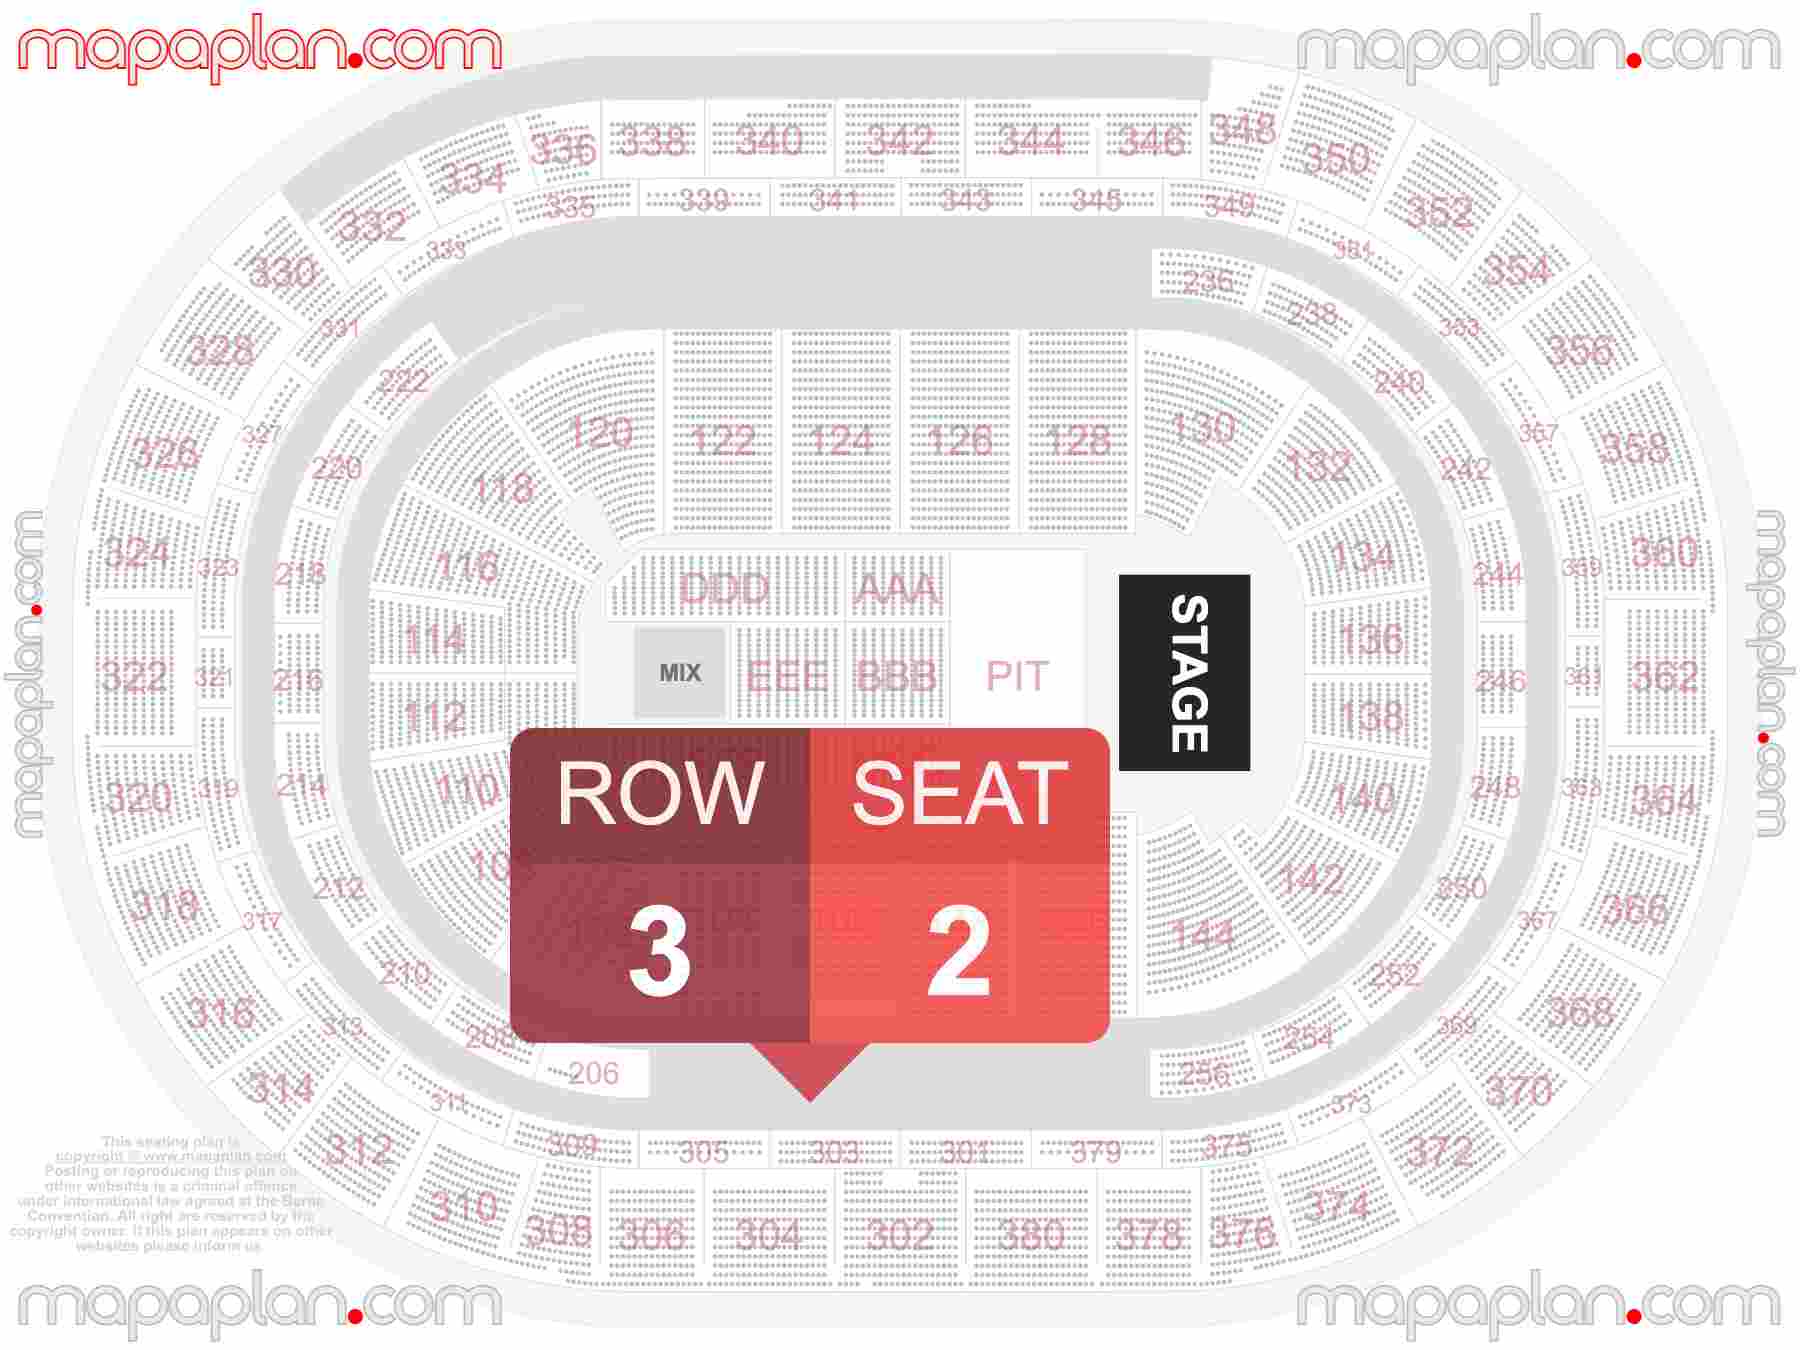 Denver Ball Arena seating chart Concert with PIT floor standing seating plan - Interactive map to find best seat and row numbers